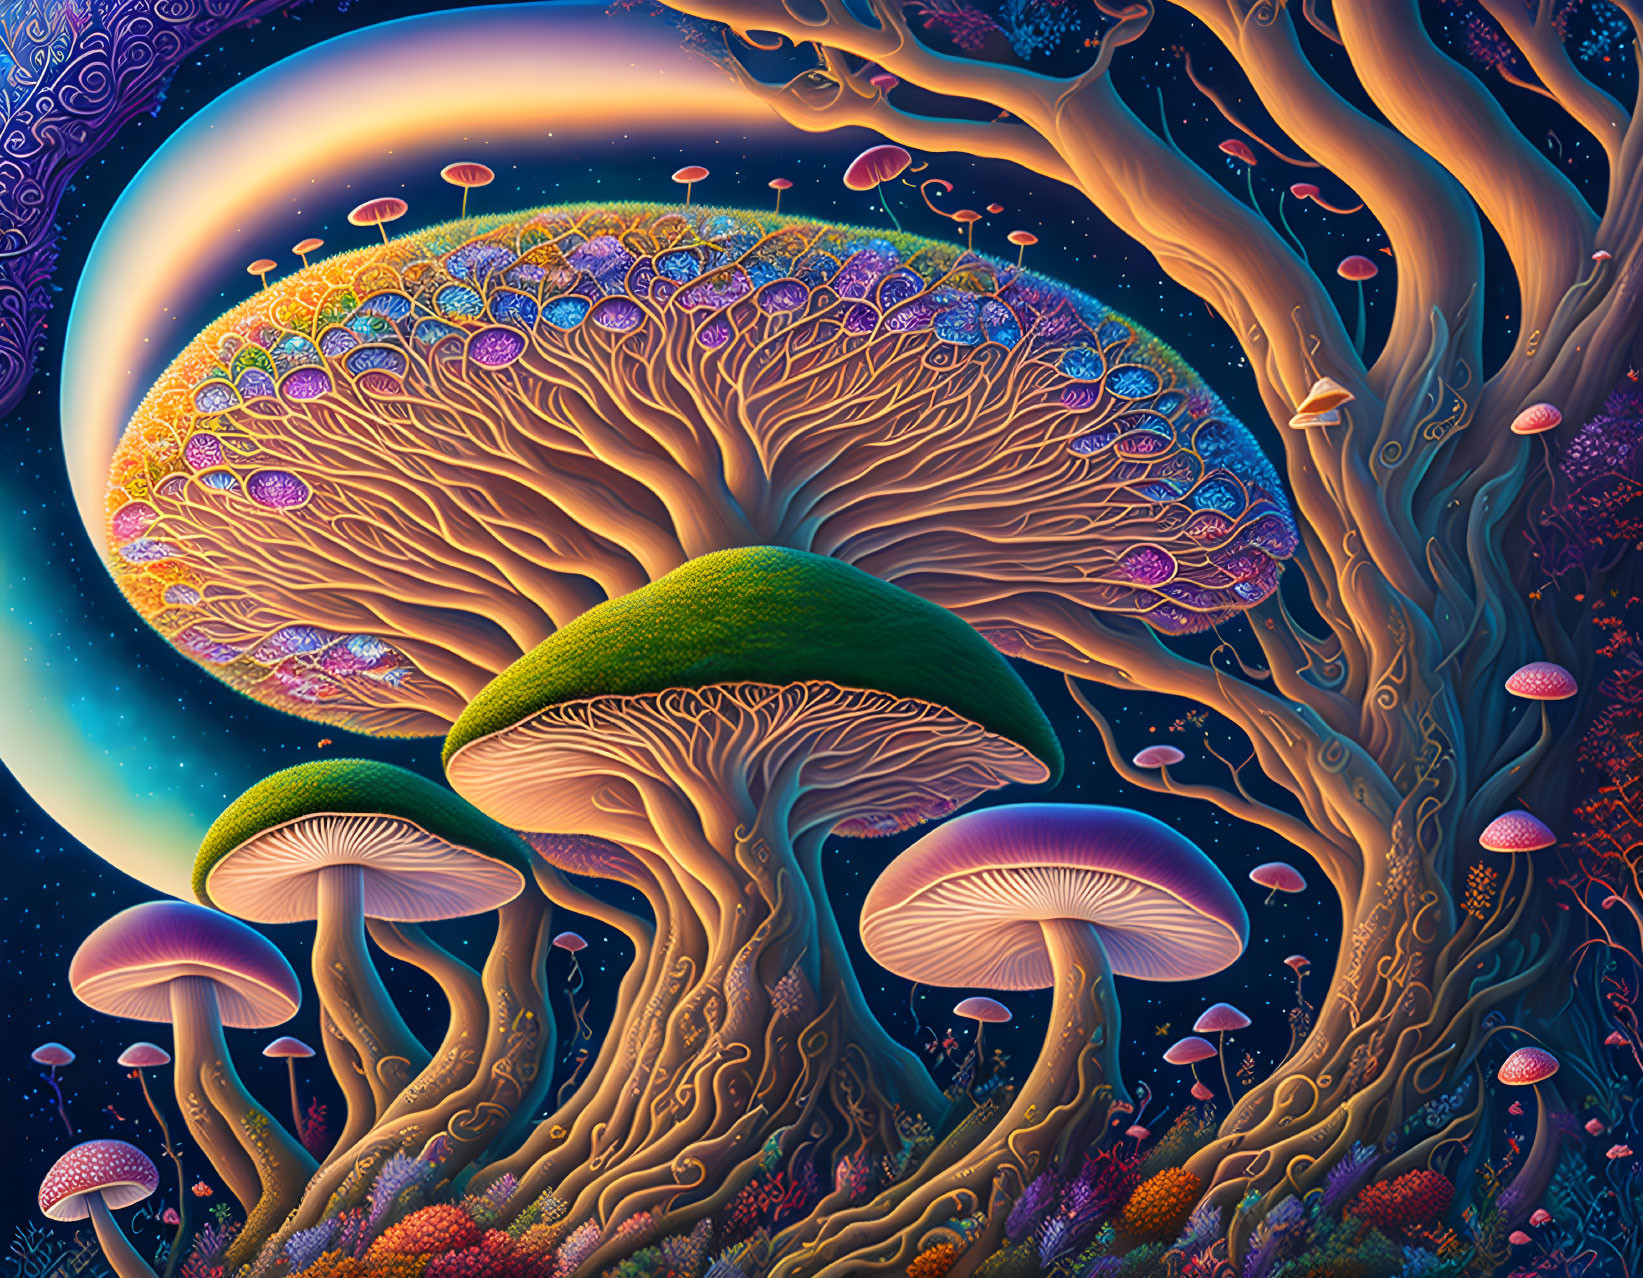 Colorful Psychedelic Mushroom and Tree Illustration in Dreamy Setting